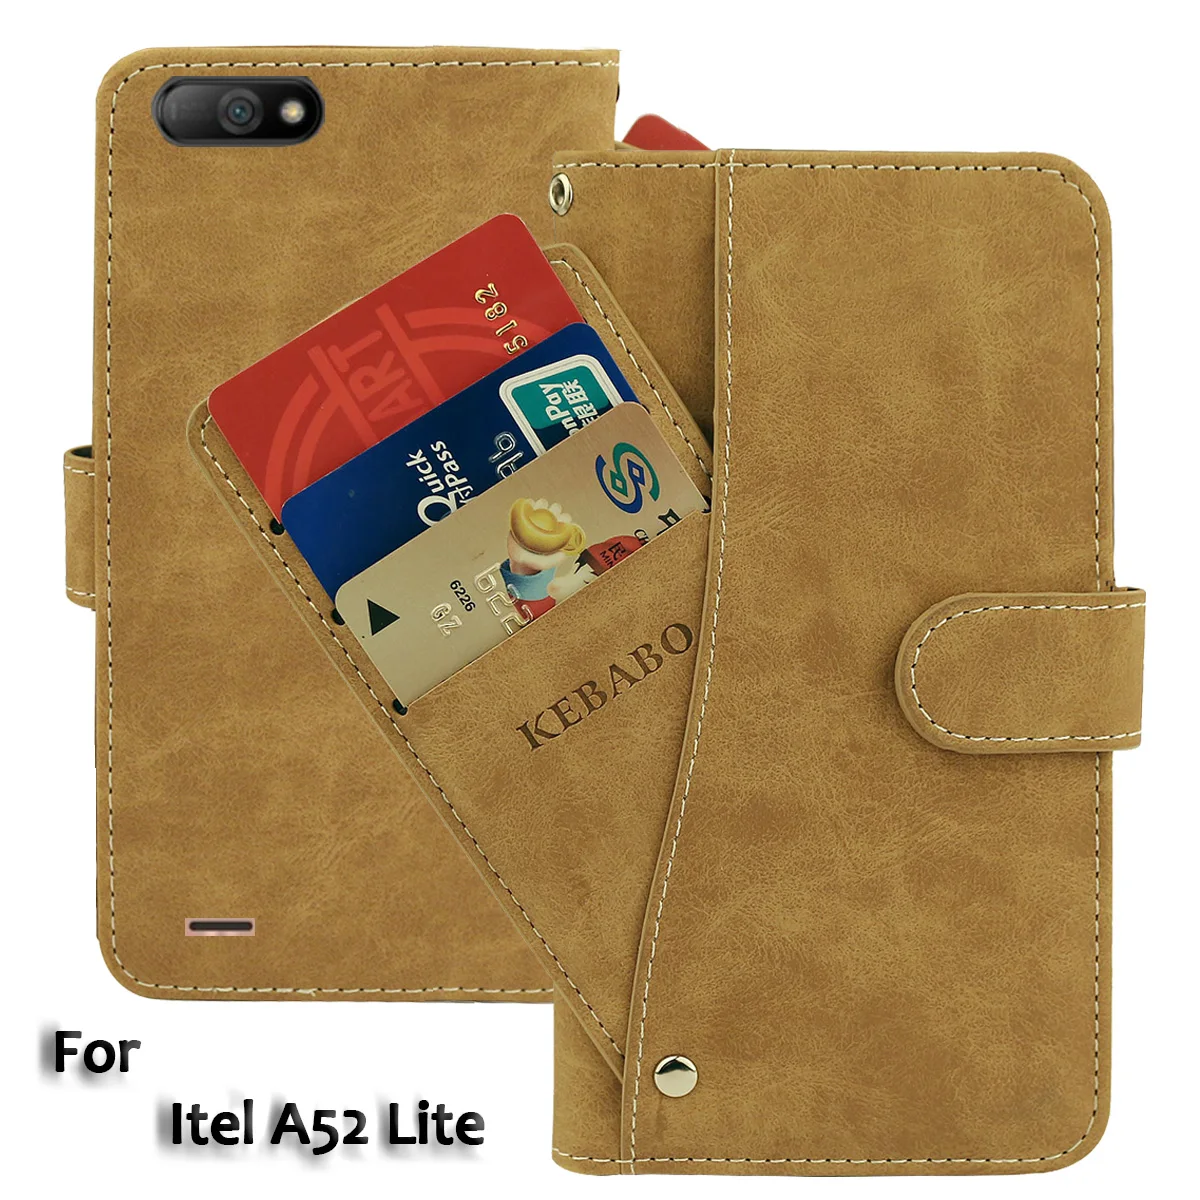 

Vintage Leather Wallet Itel A52 Lite Case 5.5" Flip Luxury 3 Front Card Slots Cover Magnet Stand Phone Protective Bags